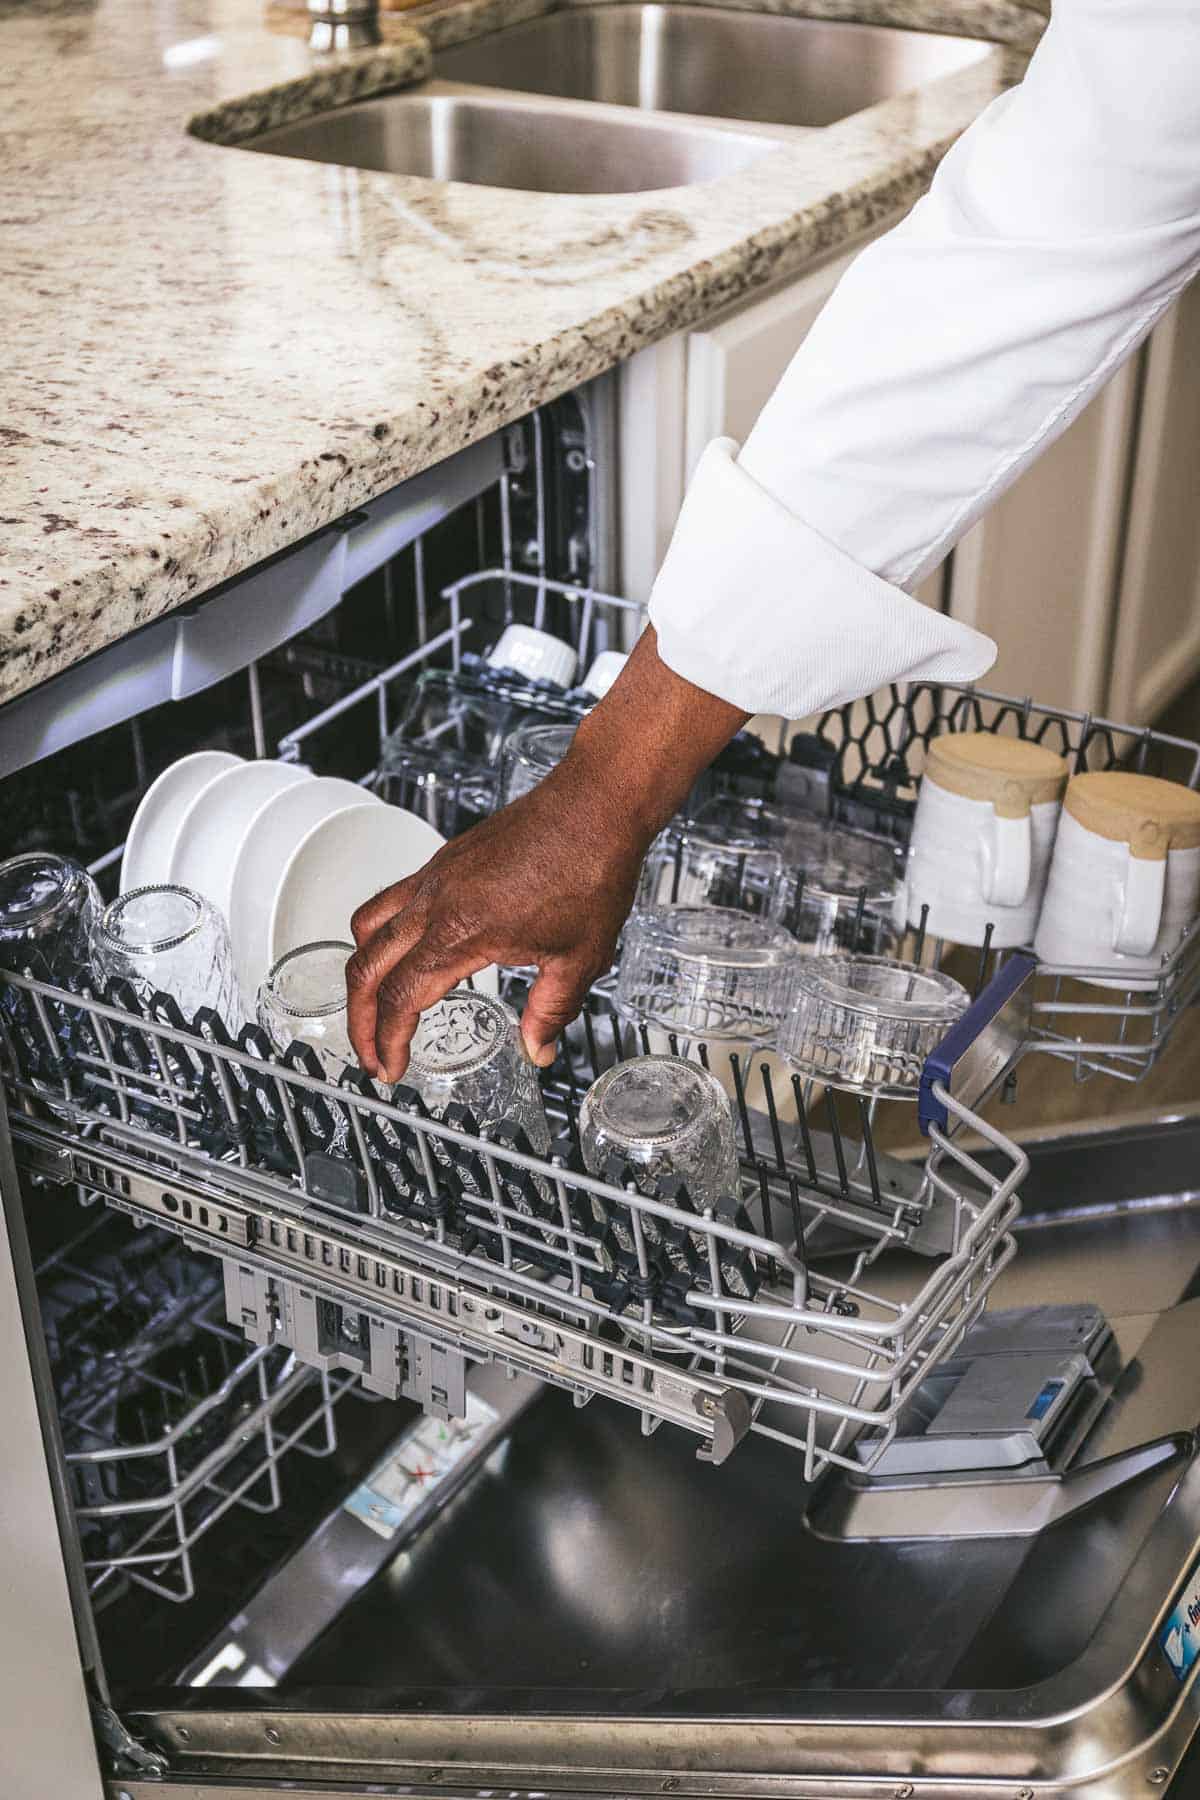 A man placing a glass in the top shelf of a dishwasher.